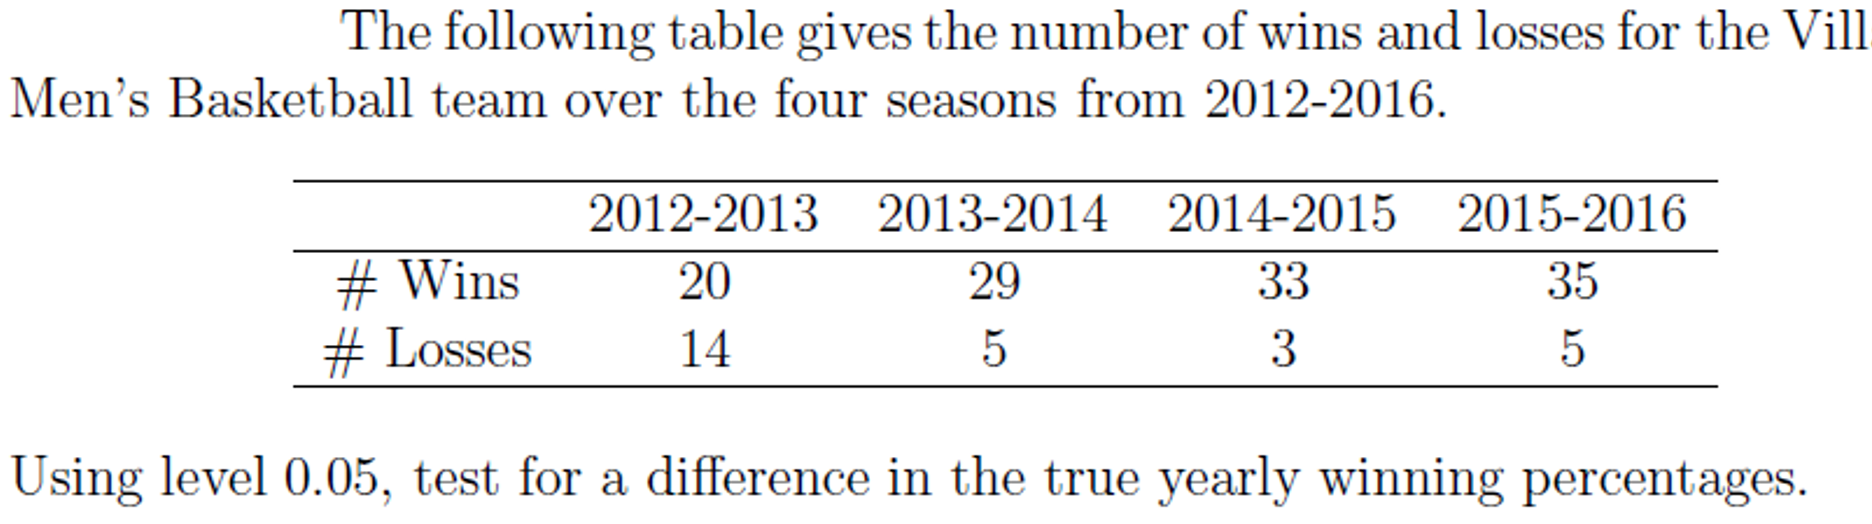 The Following Table Gives The Number Of Wins And Losses For The Vill Men S Basketball Team Over The Four Seasons From 20 1